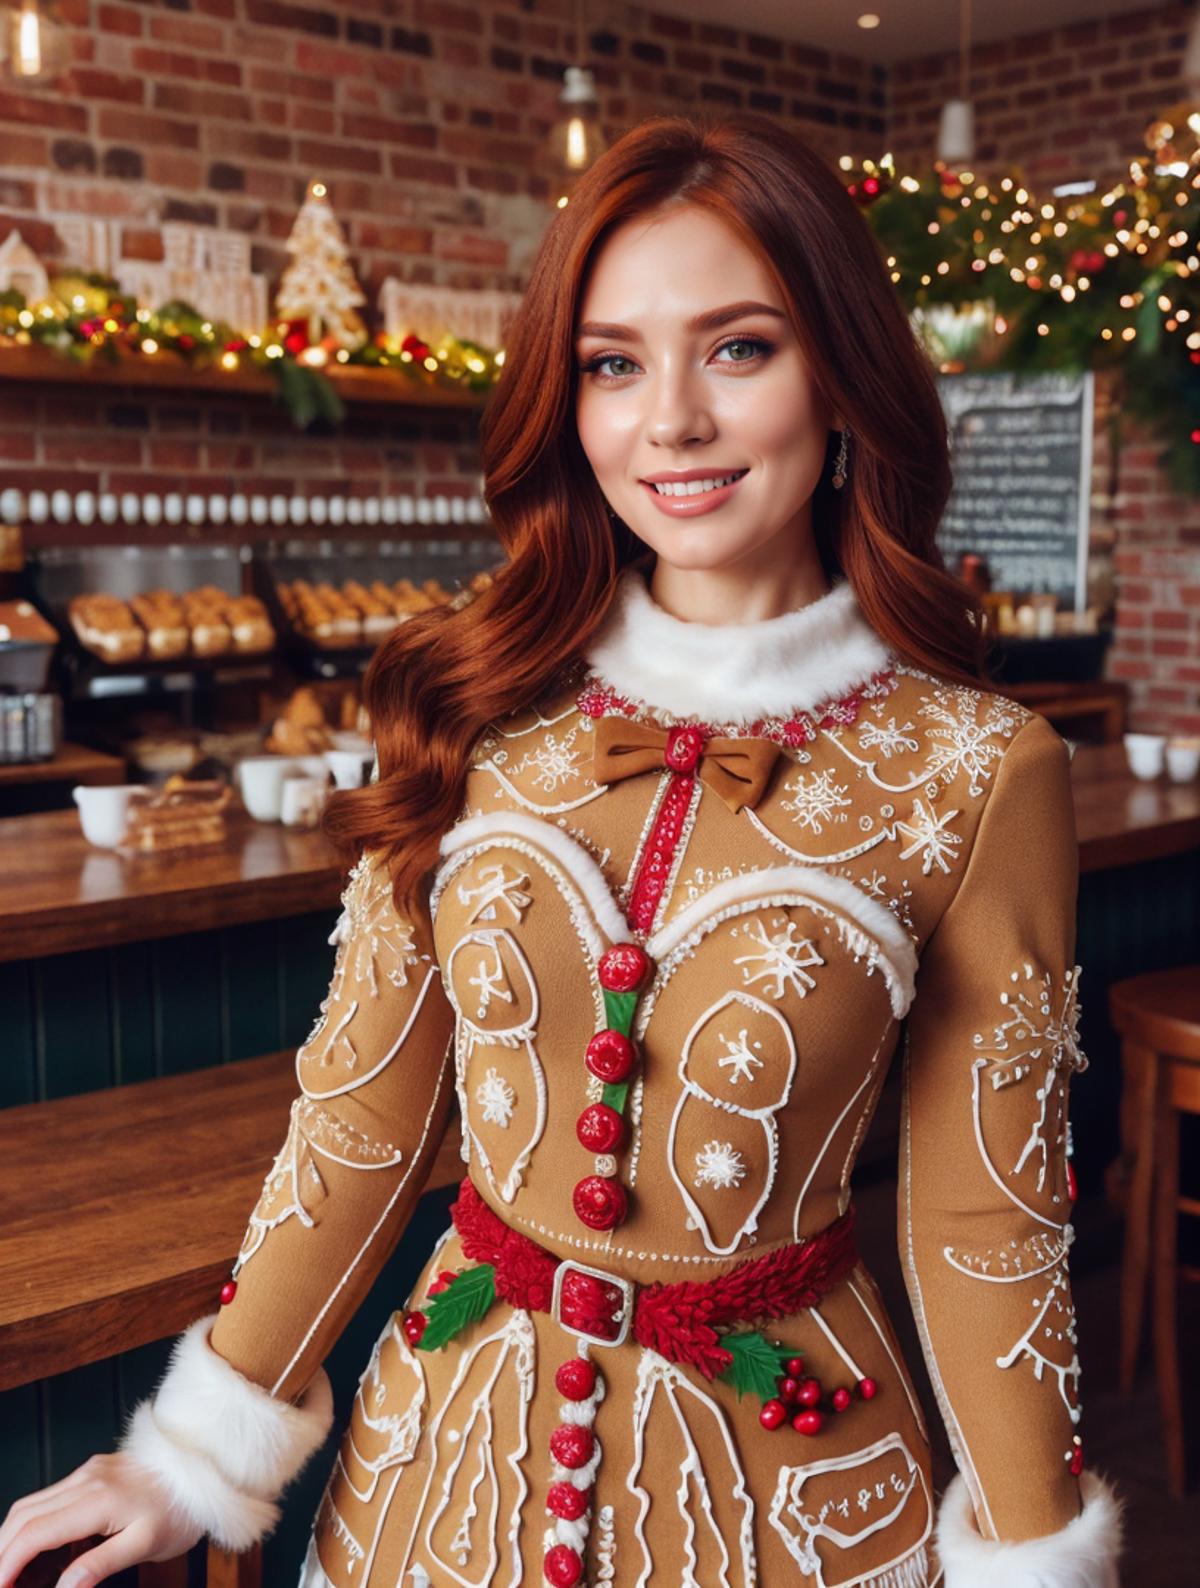 A smiling woman in a Christmas outfit in front of a brick wall.